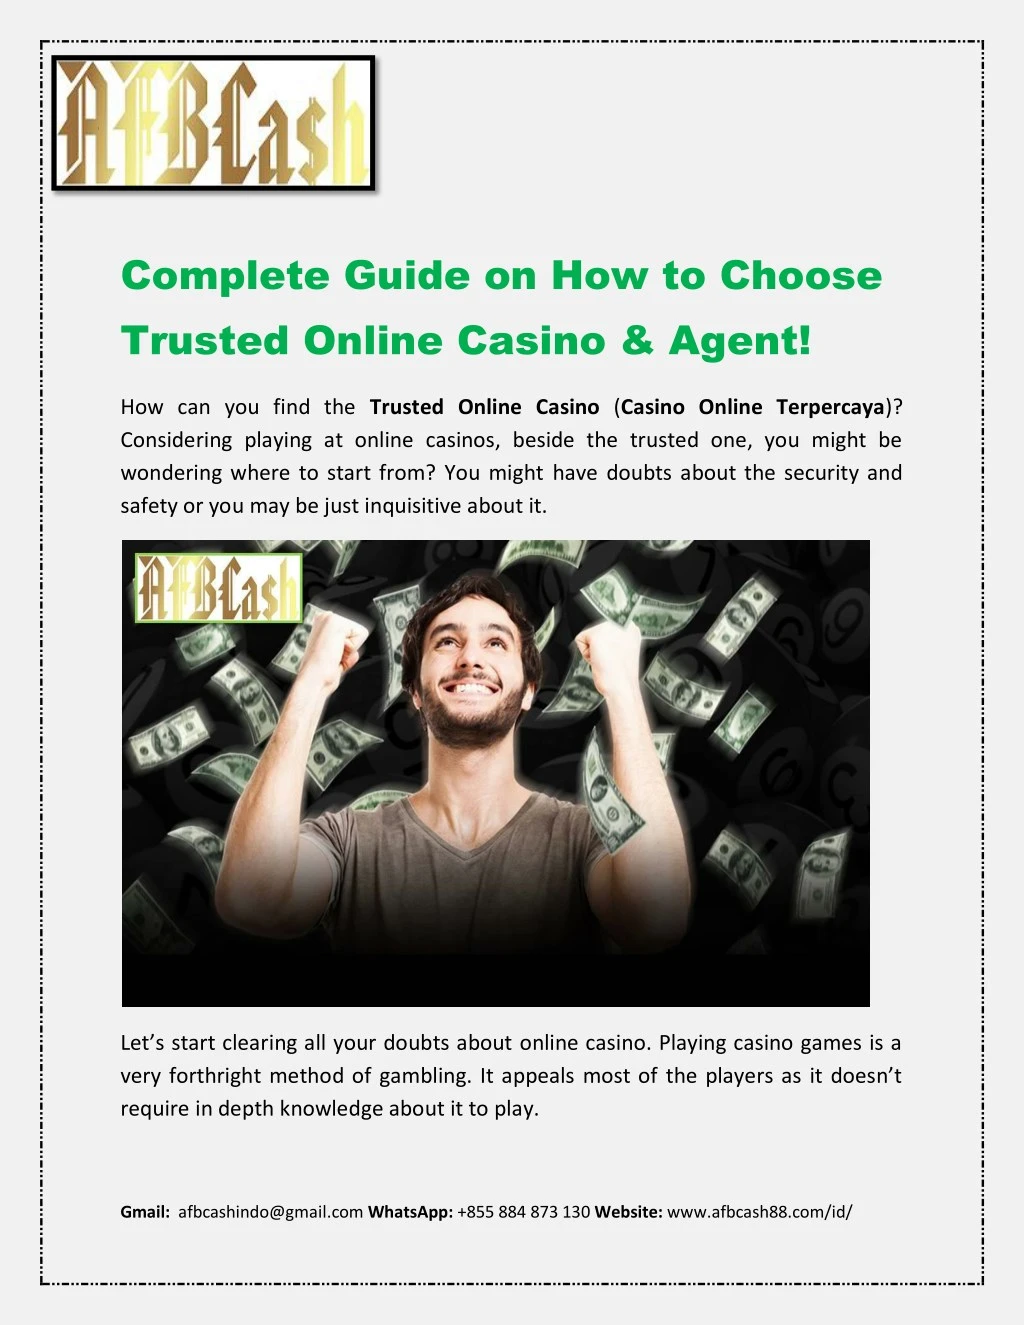 complete guide on how to choose trusted online